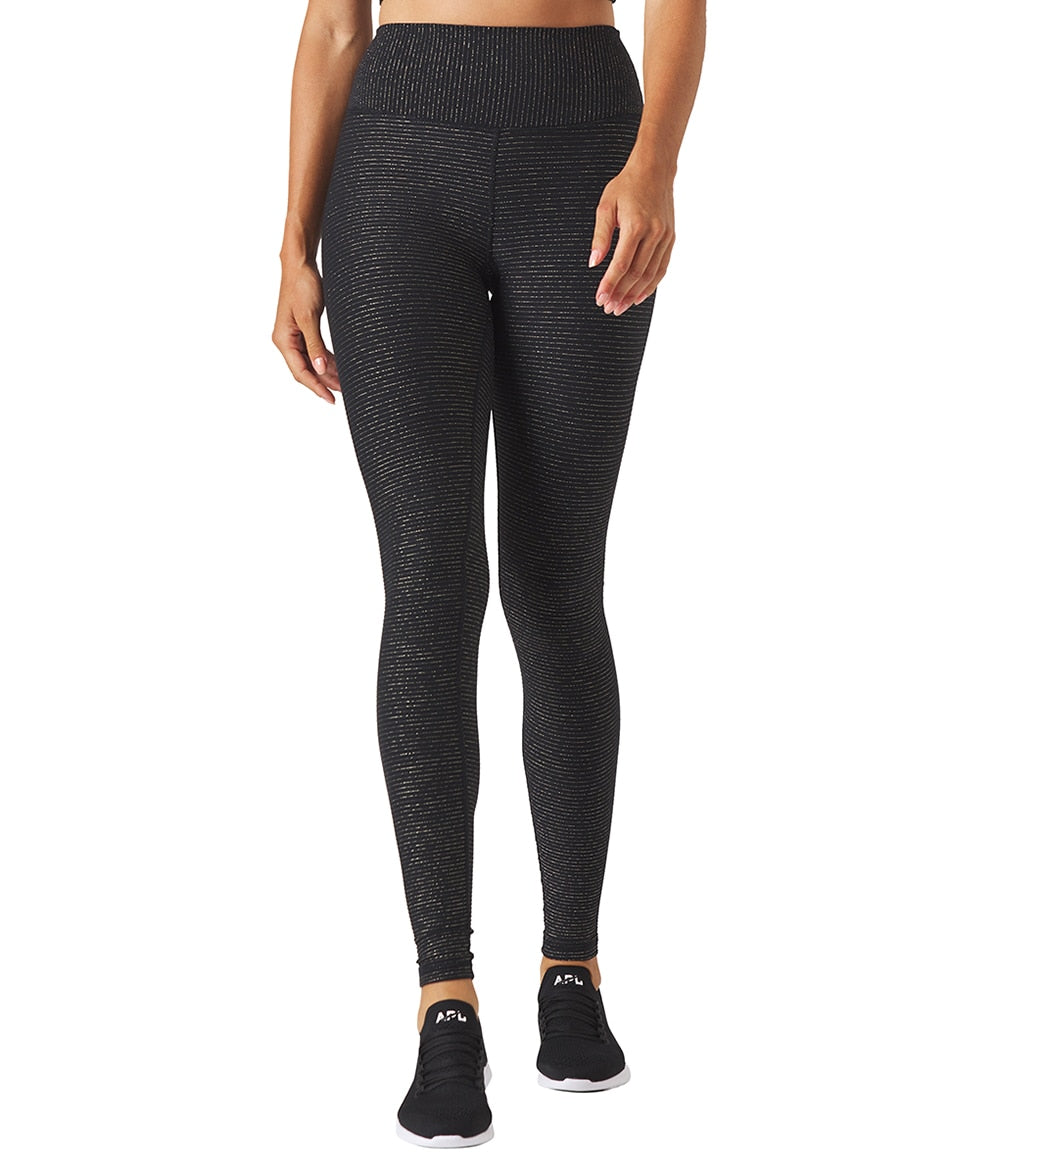 Glyder Pure 7/8 Yoga Leggings at YogaOutlet.com - Free Shipping